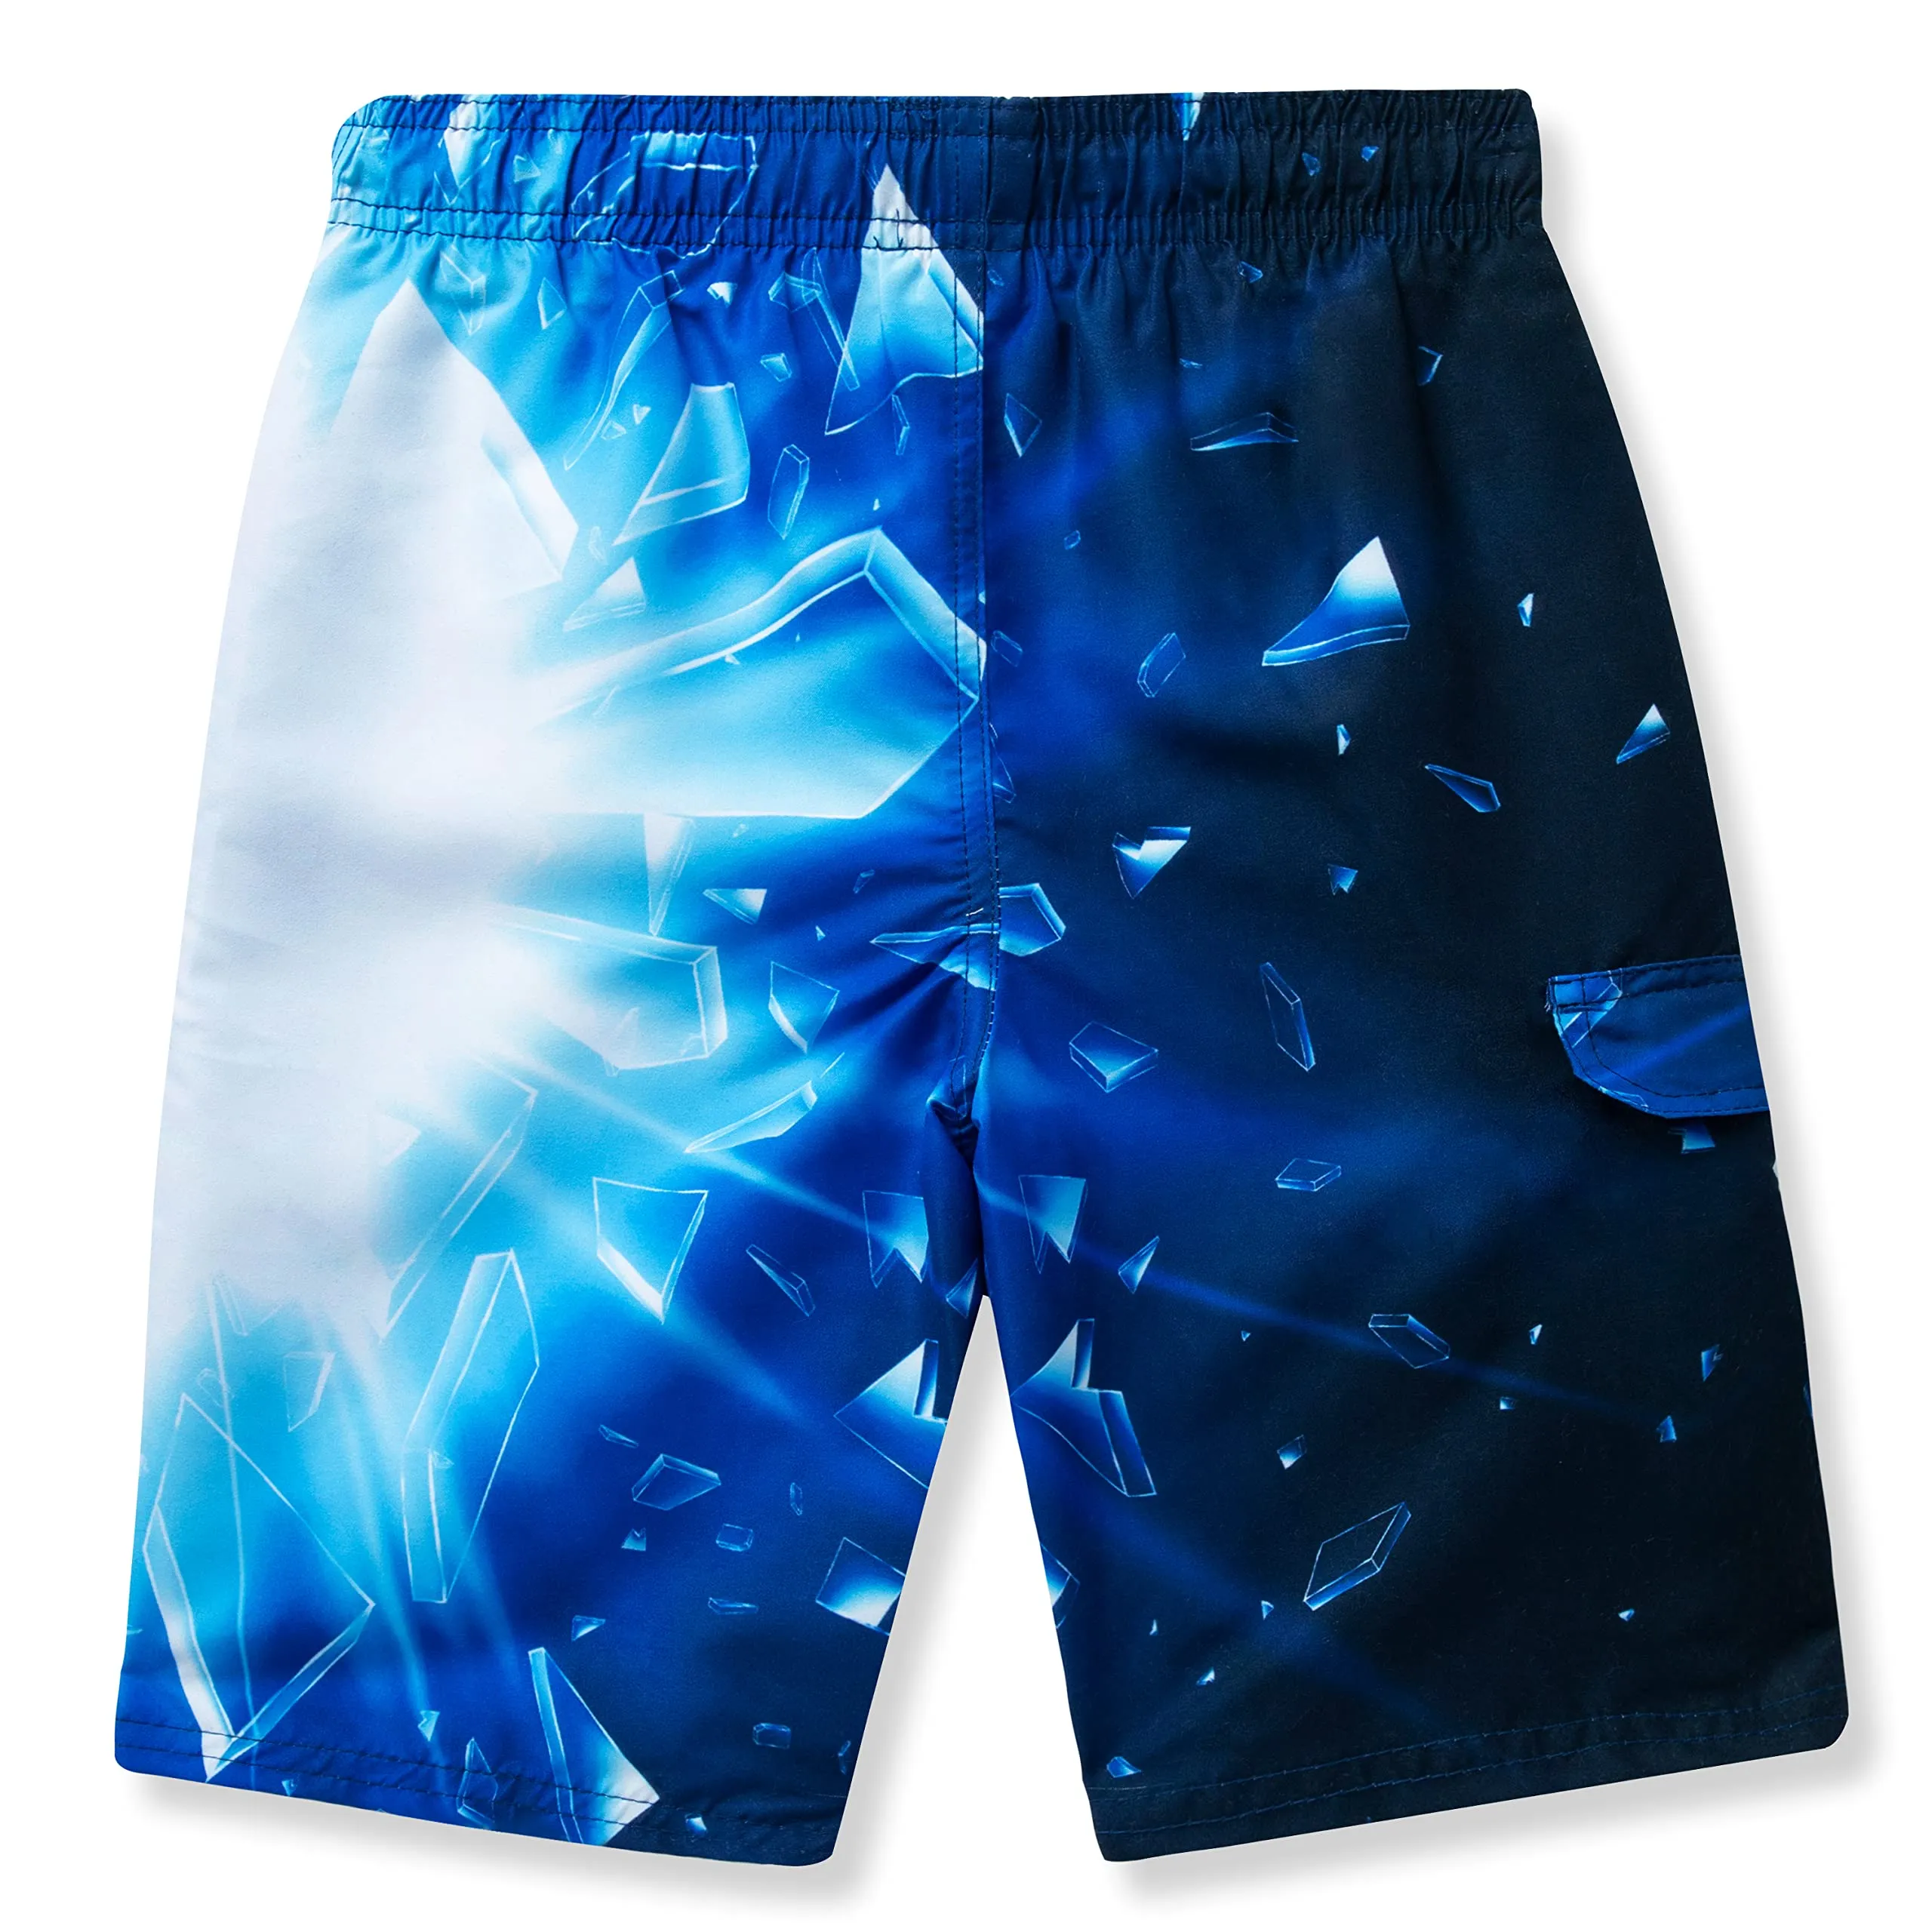 WAYMAY Ultimate Frisbee Evolution Men's Quick Dry Surf Swim Trunks